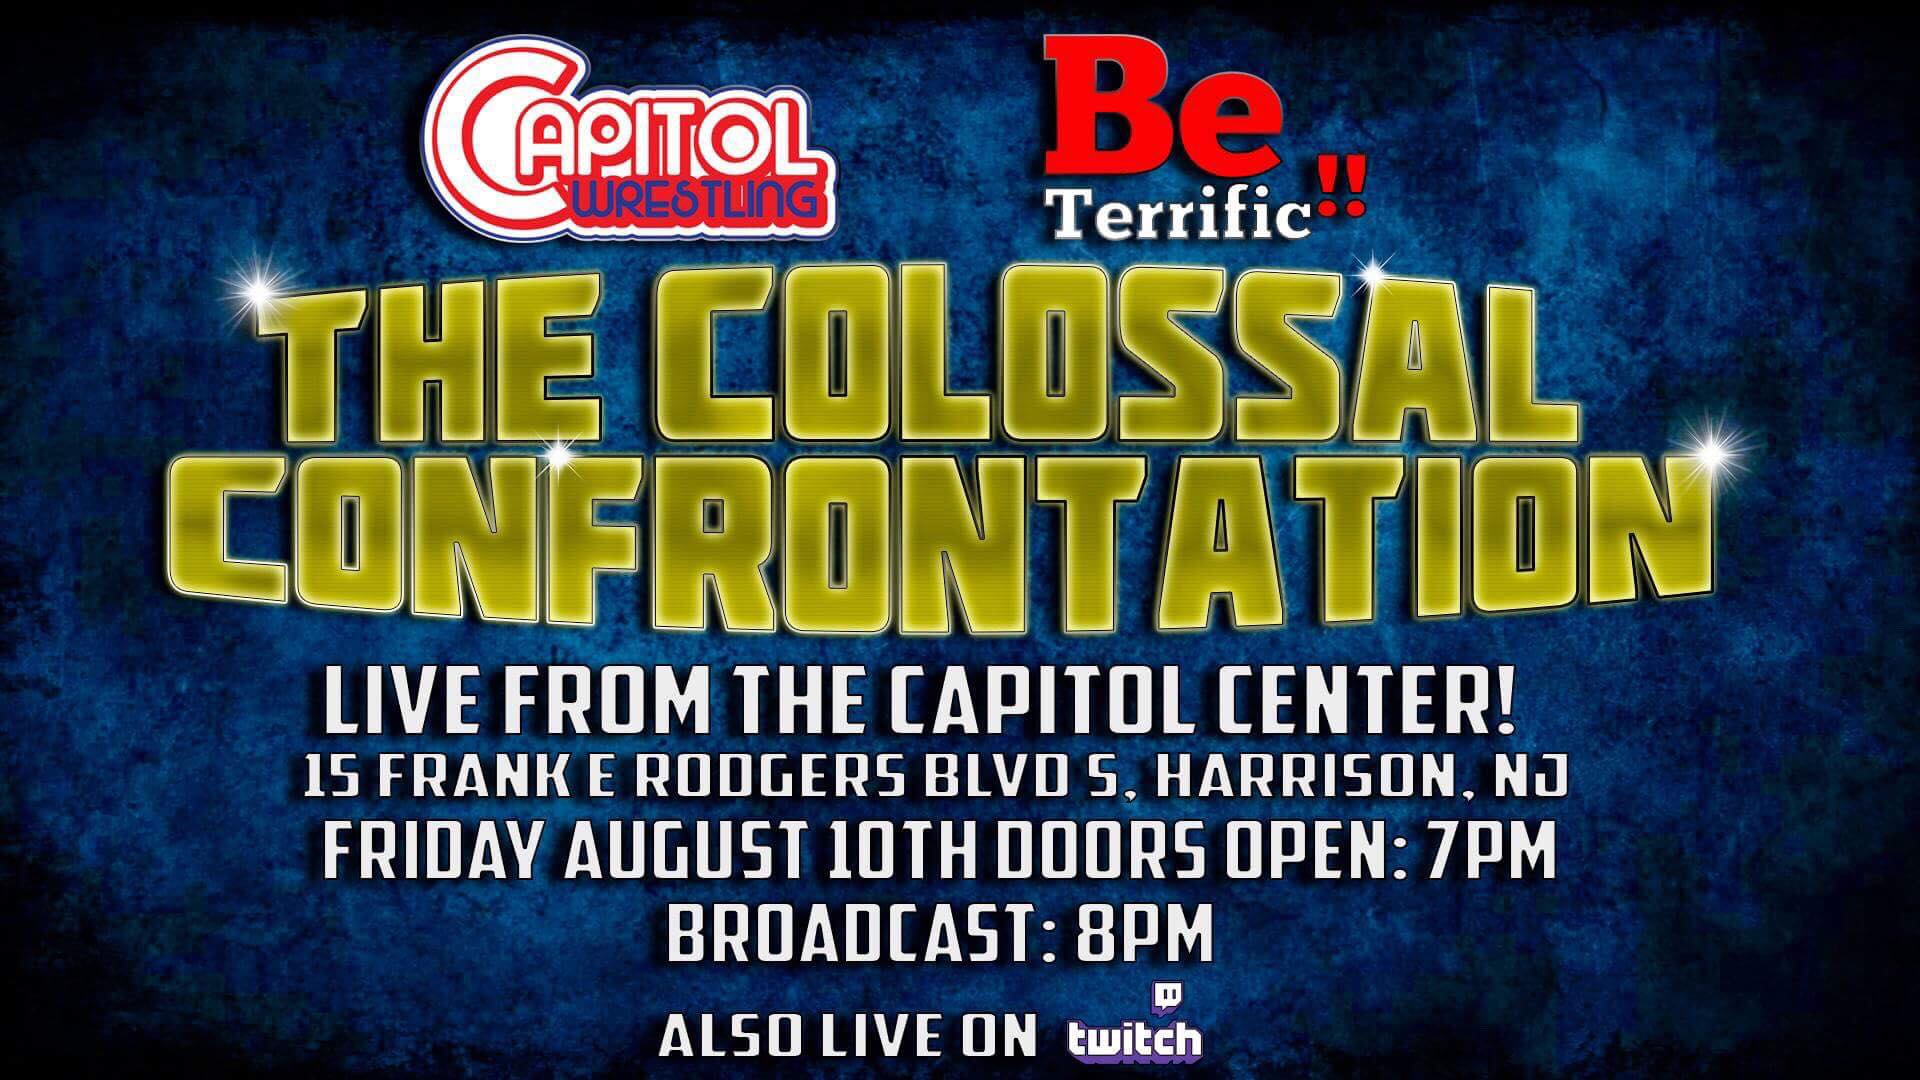 Exclusive: Capitol Wrestling & BETerrific Partner For Live ‘The Colossal Confrontation’ Twitch Special On August 10th